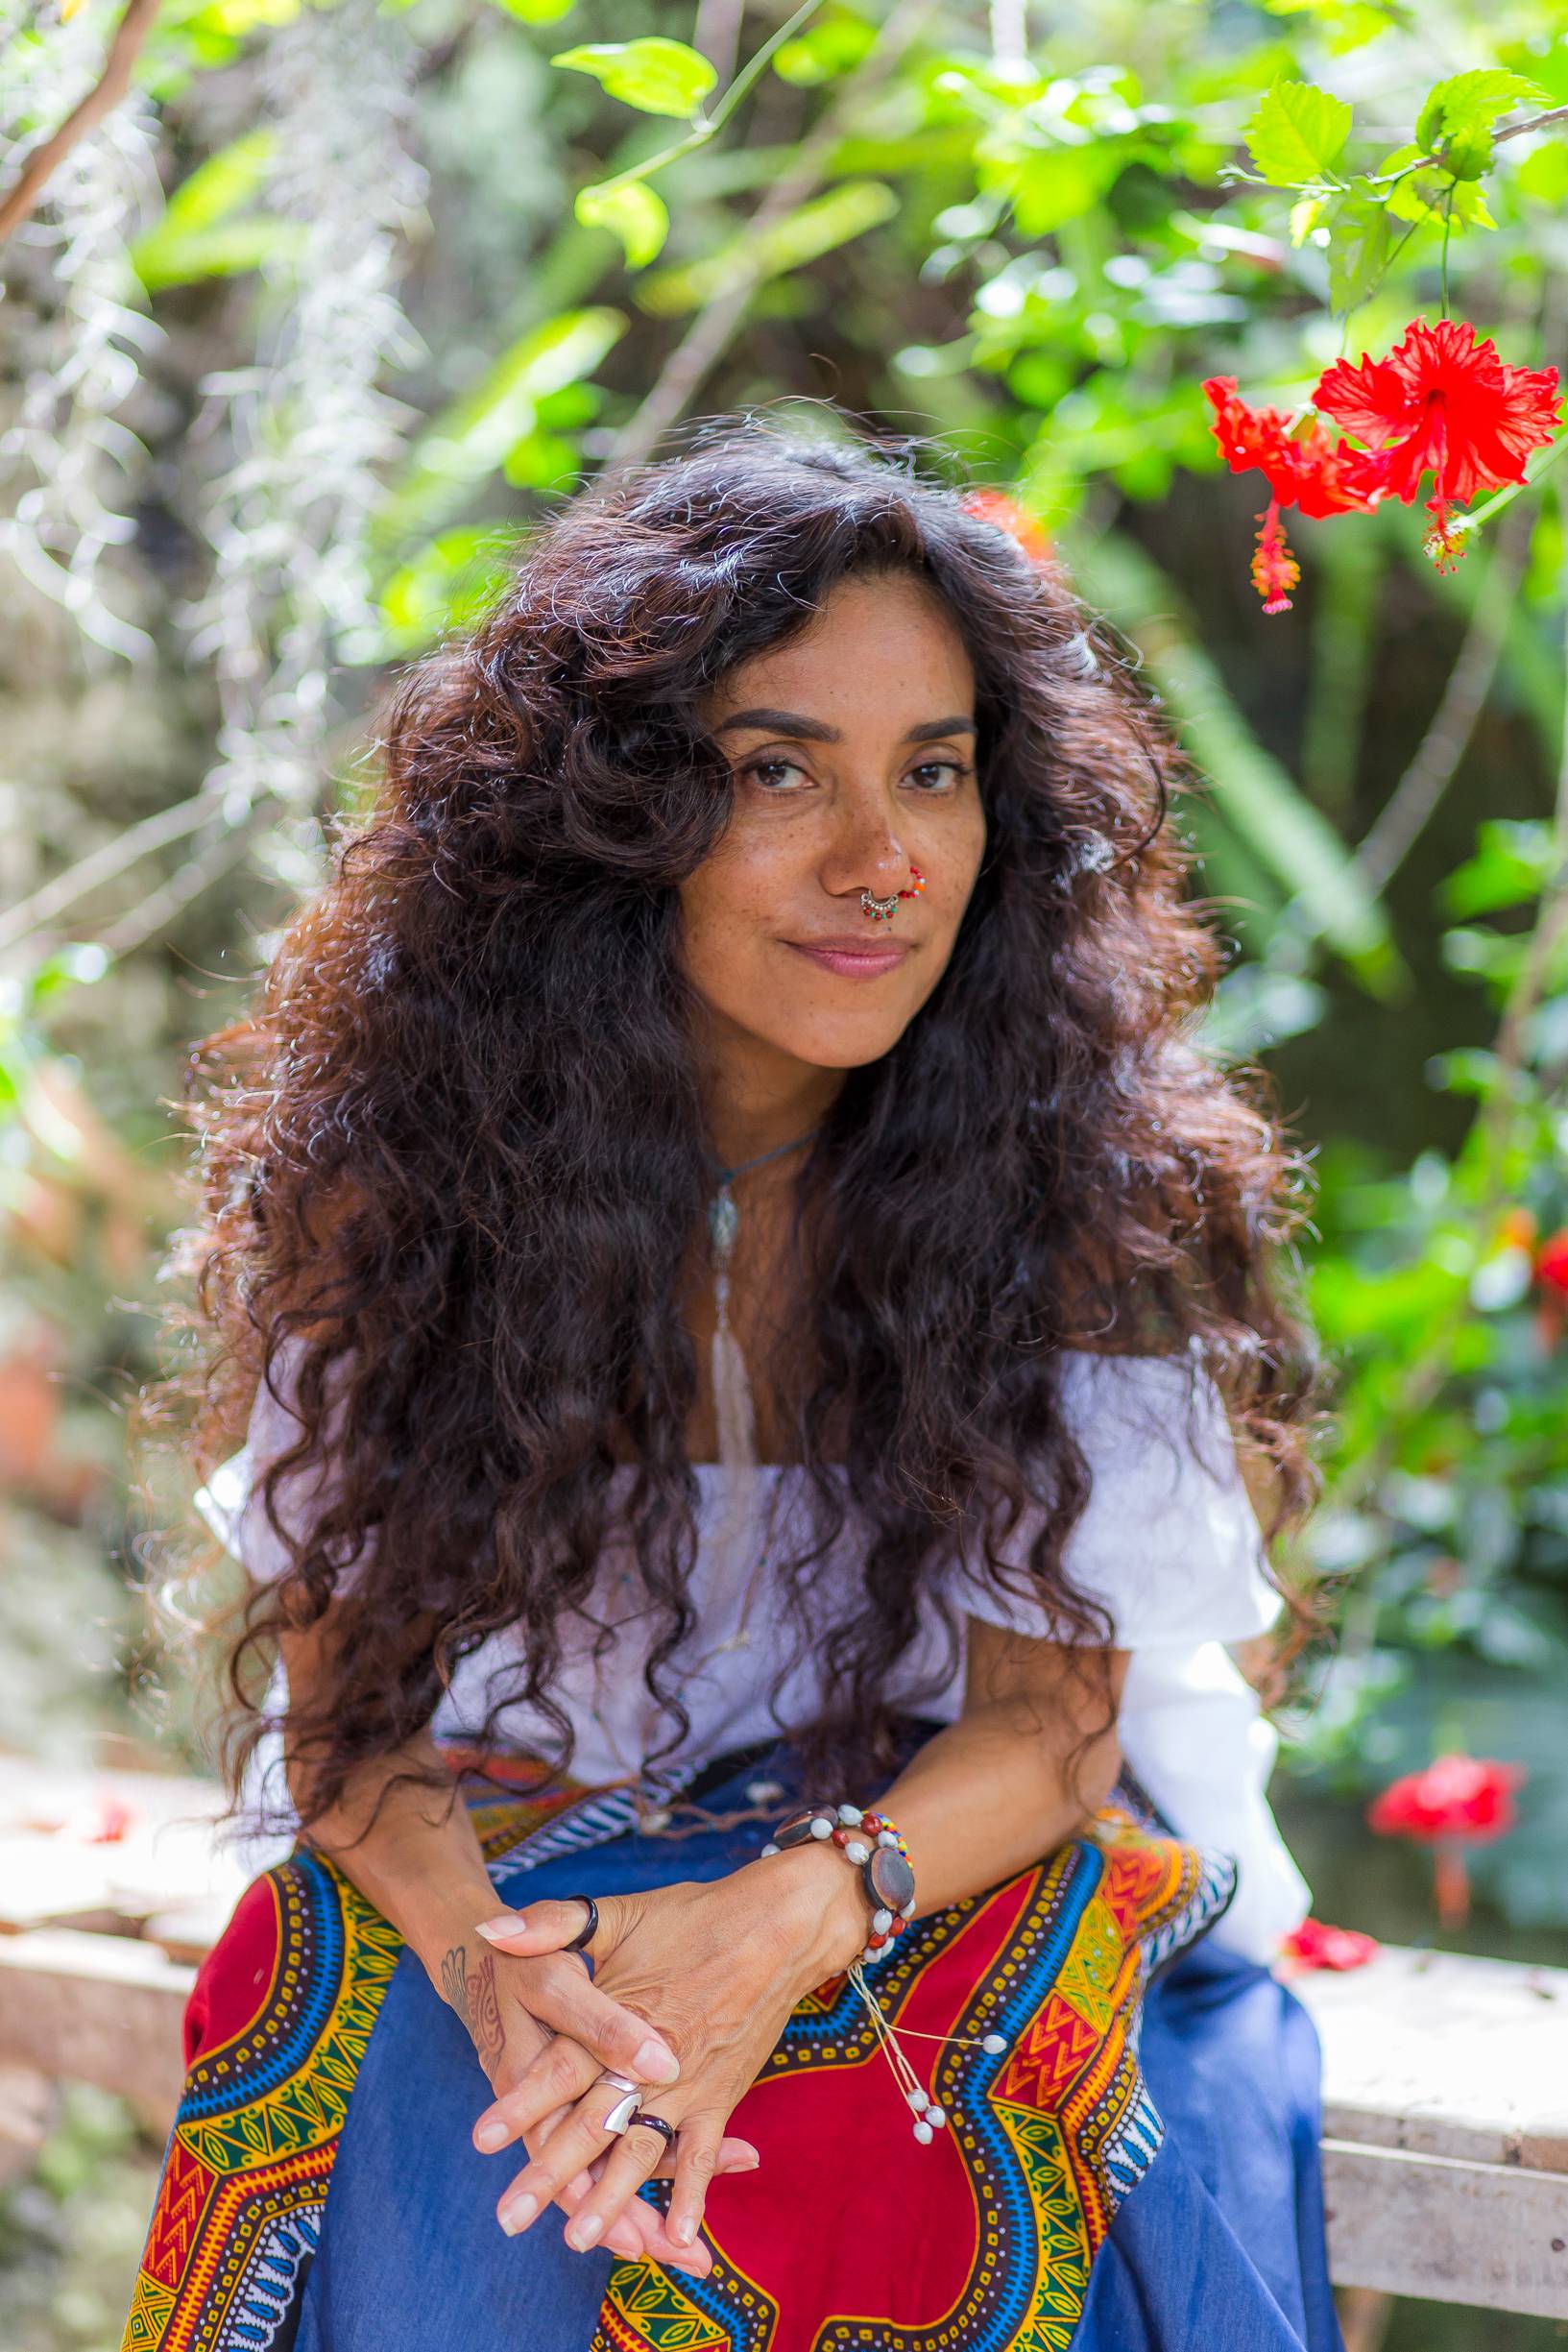 Yuyi Morales sitting on a bench in front of green plants and red flowers